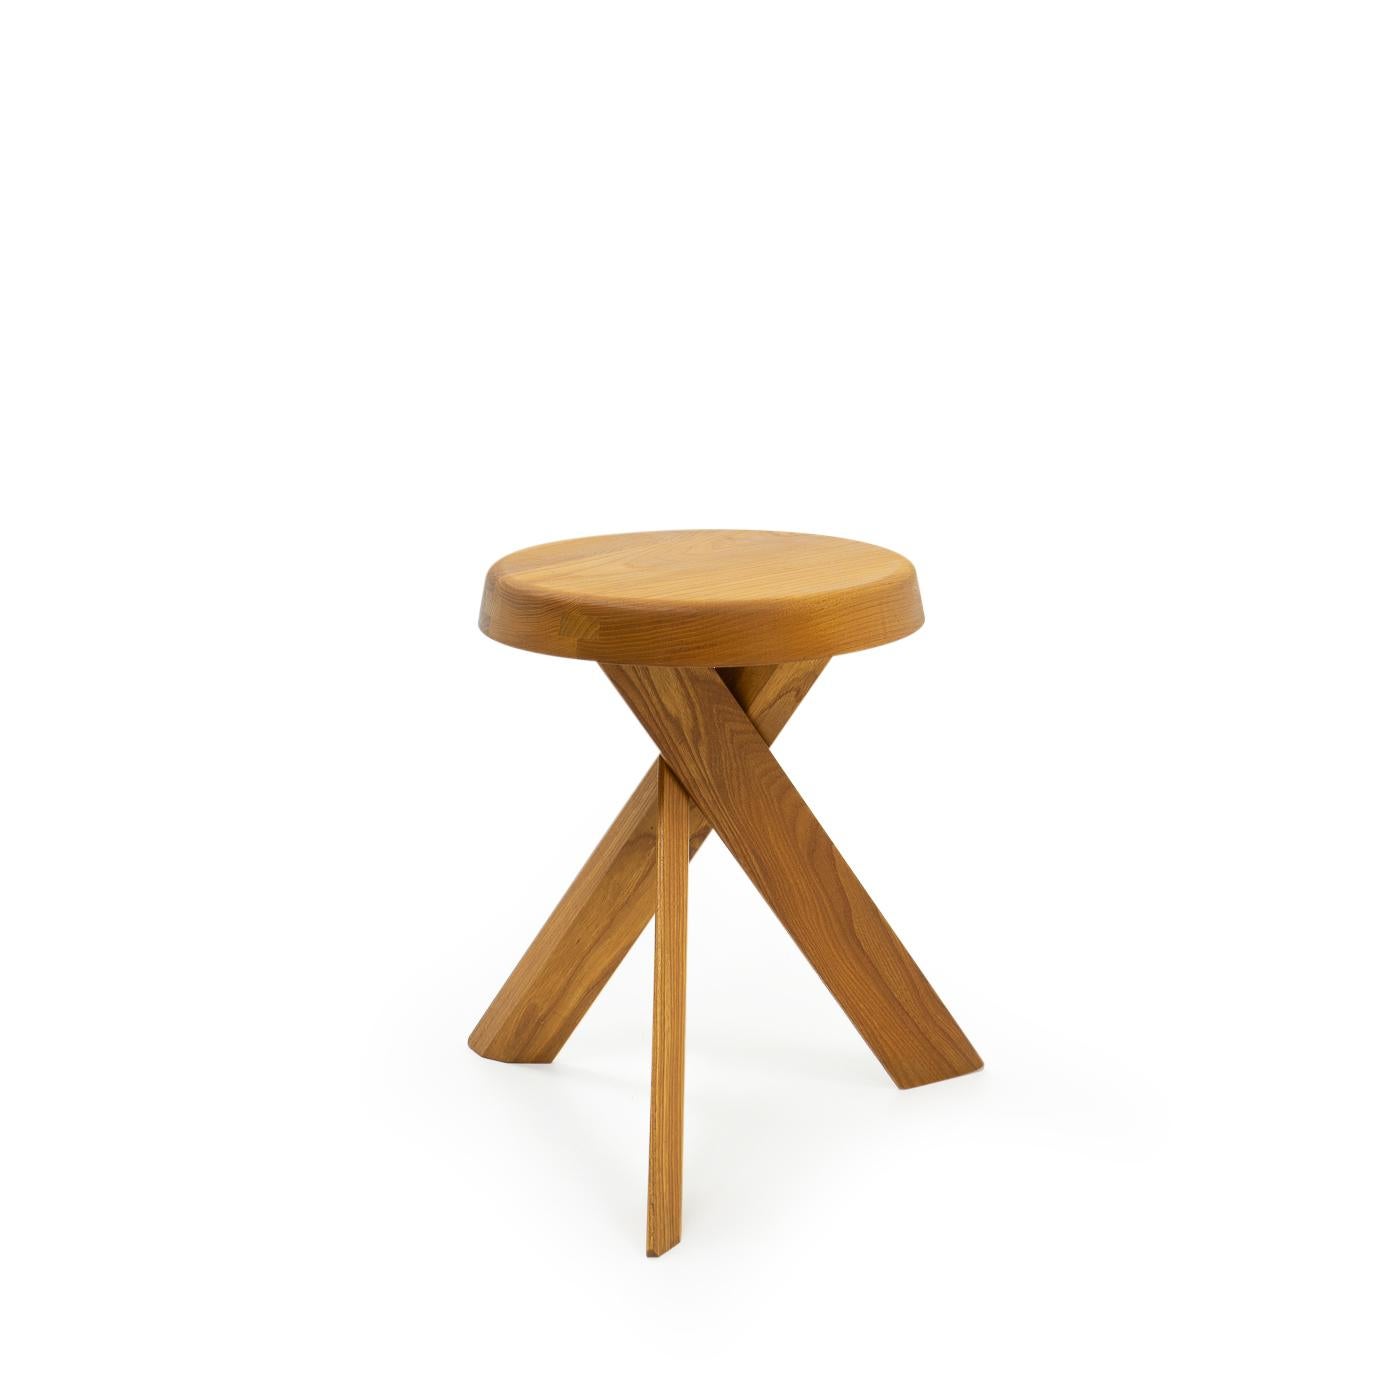 “The S13 stool plays on the assembly of three converging legs and manages to achieve a solid, stable base that takes the full weight of a person on a small seat surface. The Technical challenge adds to the stool’s appeal” (from Pierre Chapo, Magen H